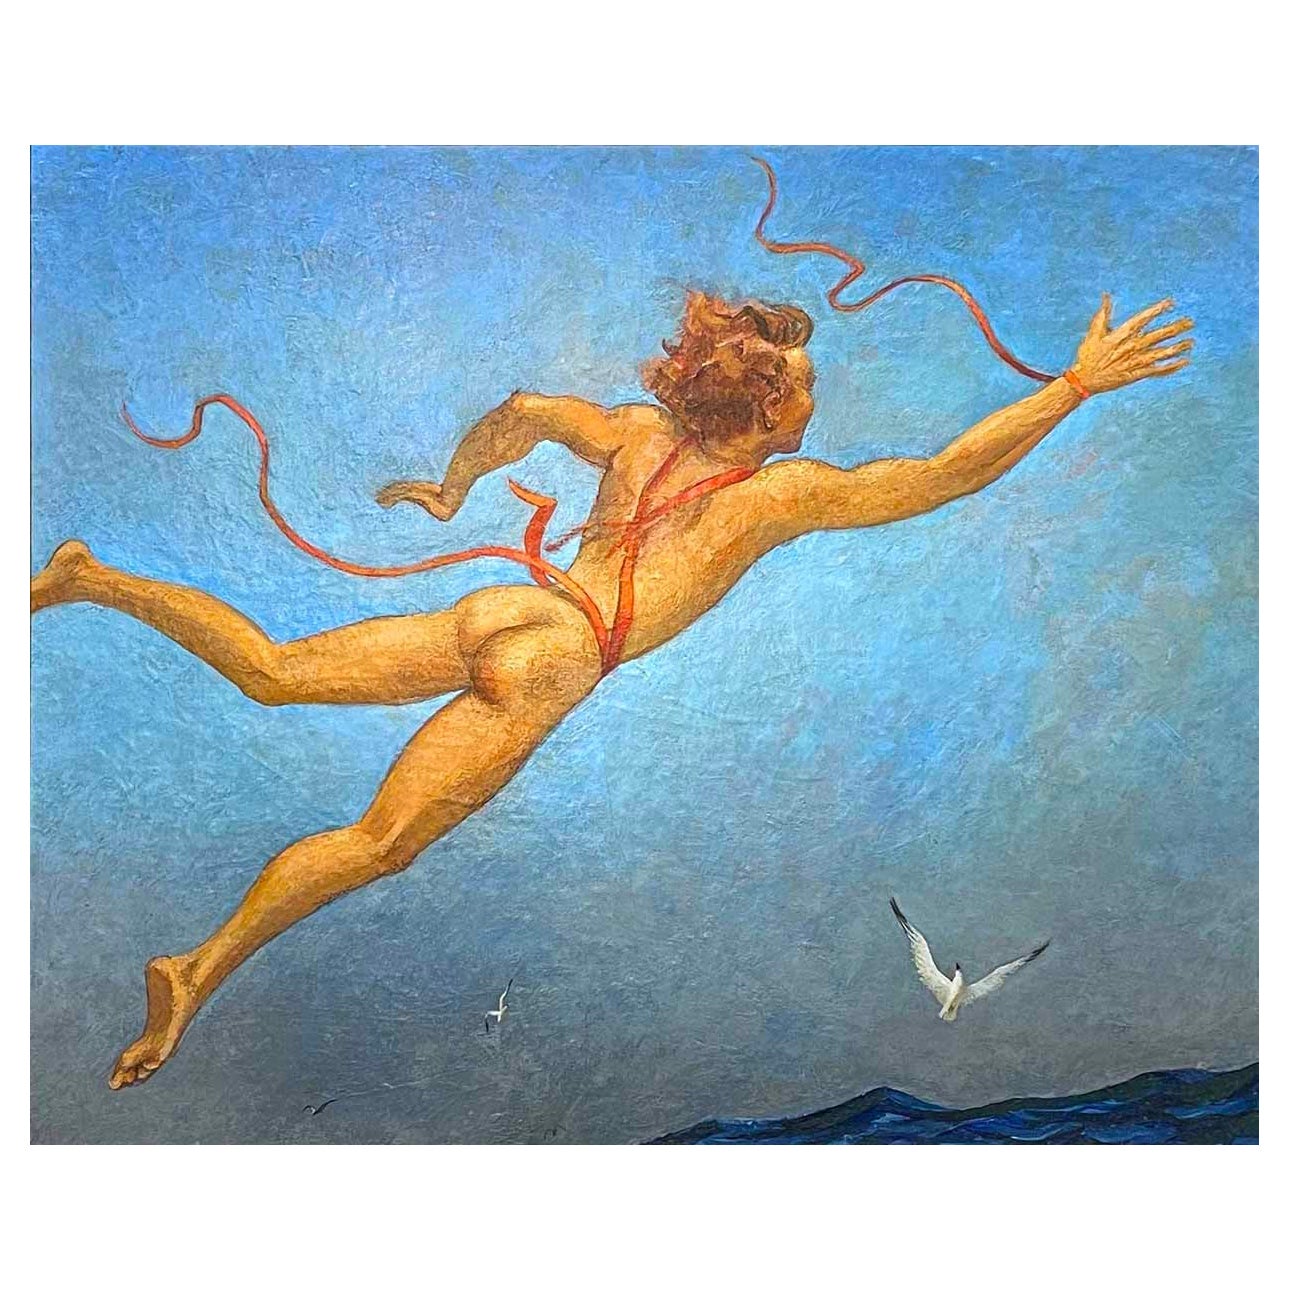 "The Fall of Icarus", Dramatic 1940s Painting w/ Male Nude by Emlen Etting